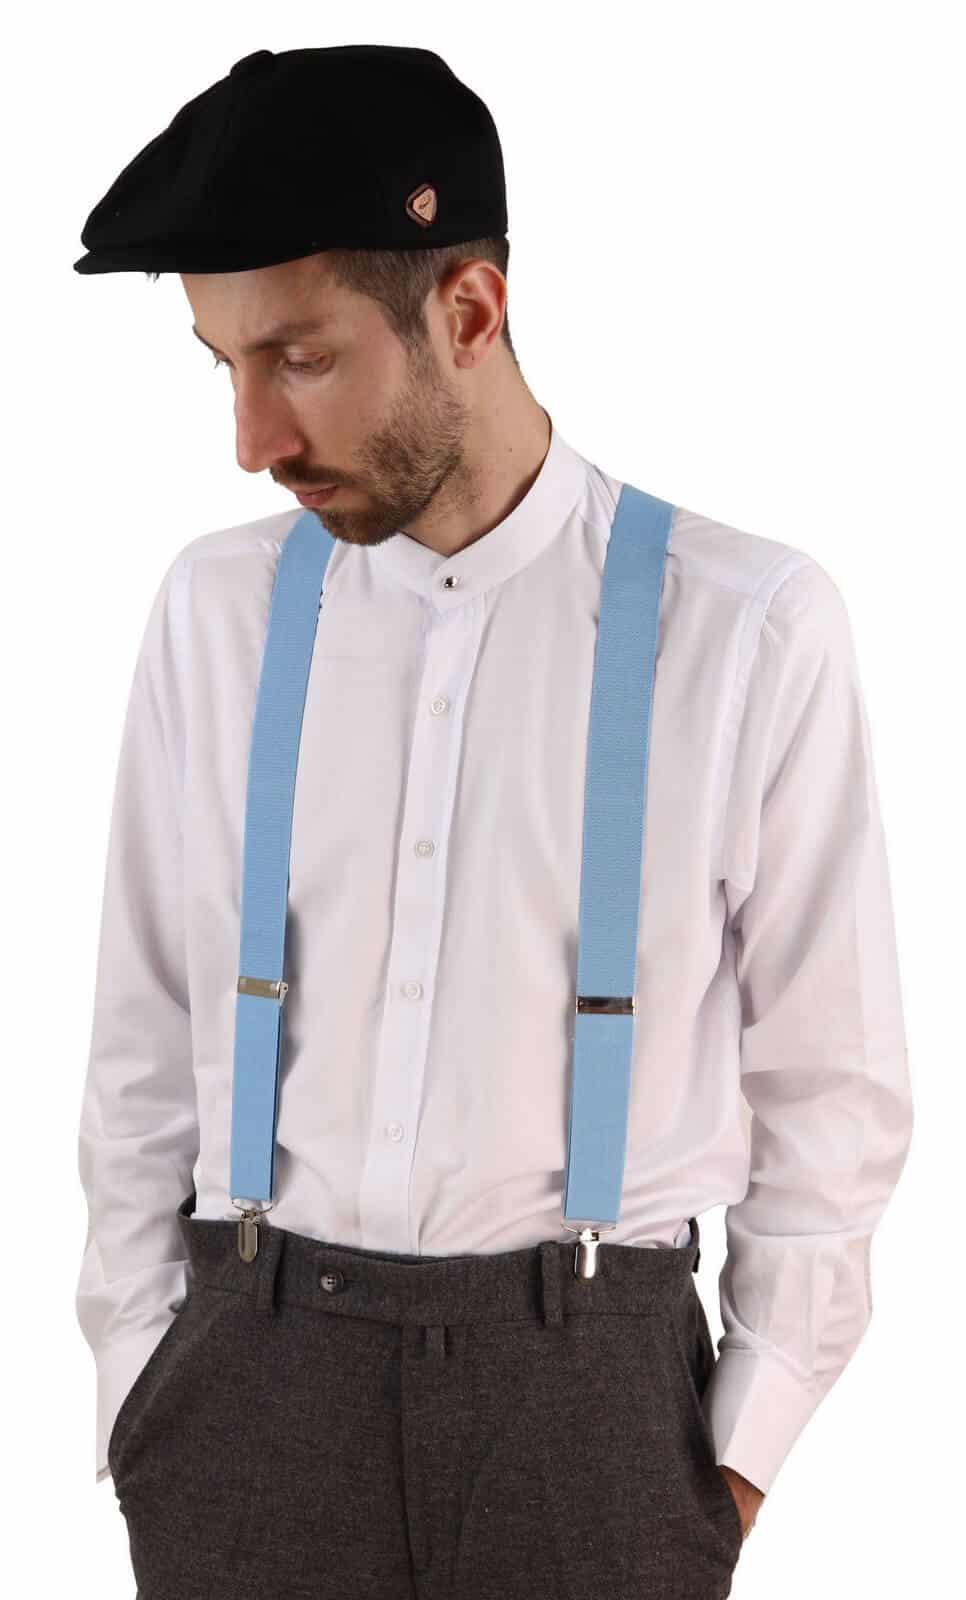 Men's Button Y-Back Suspenders | Duluth Trading Company